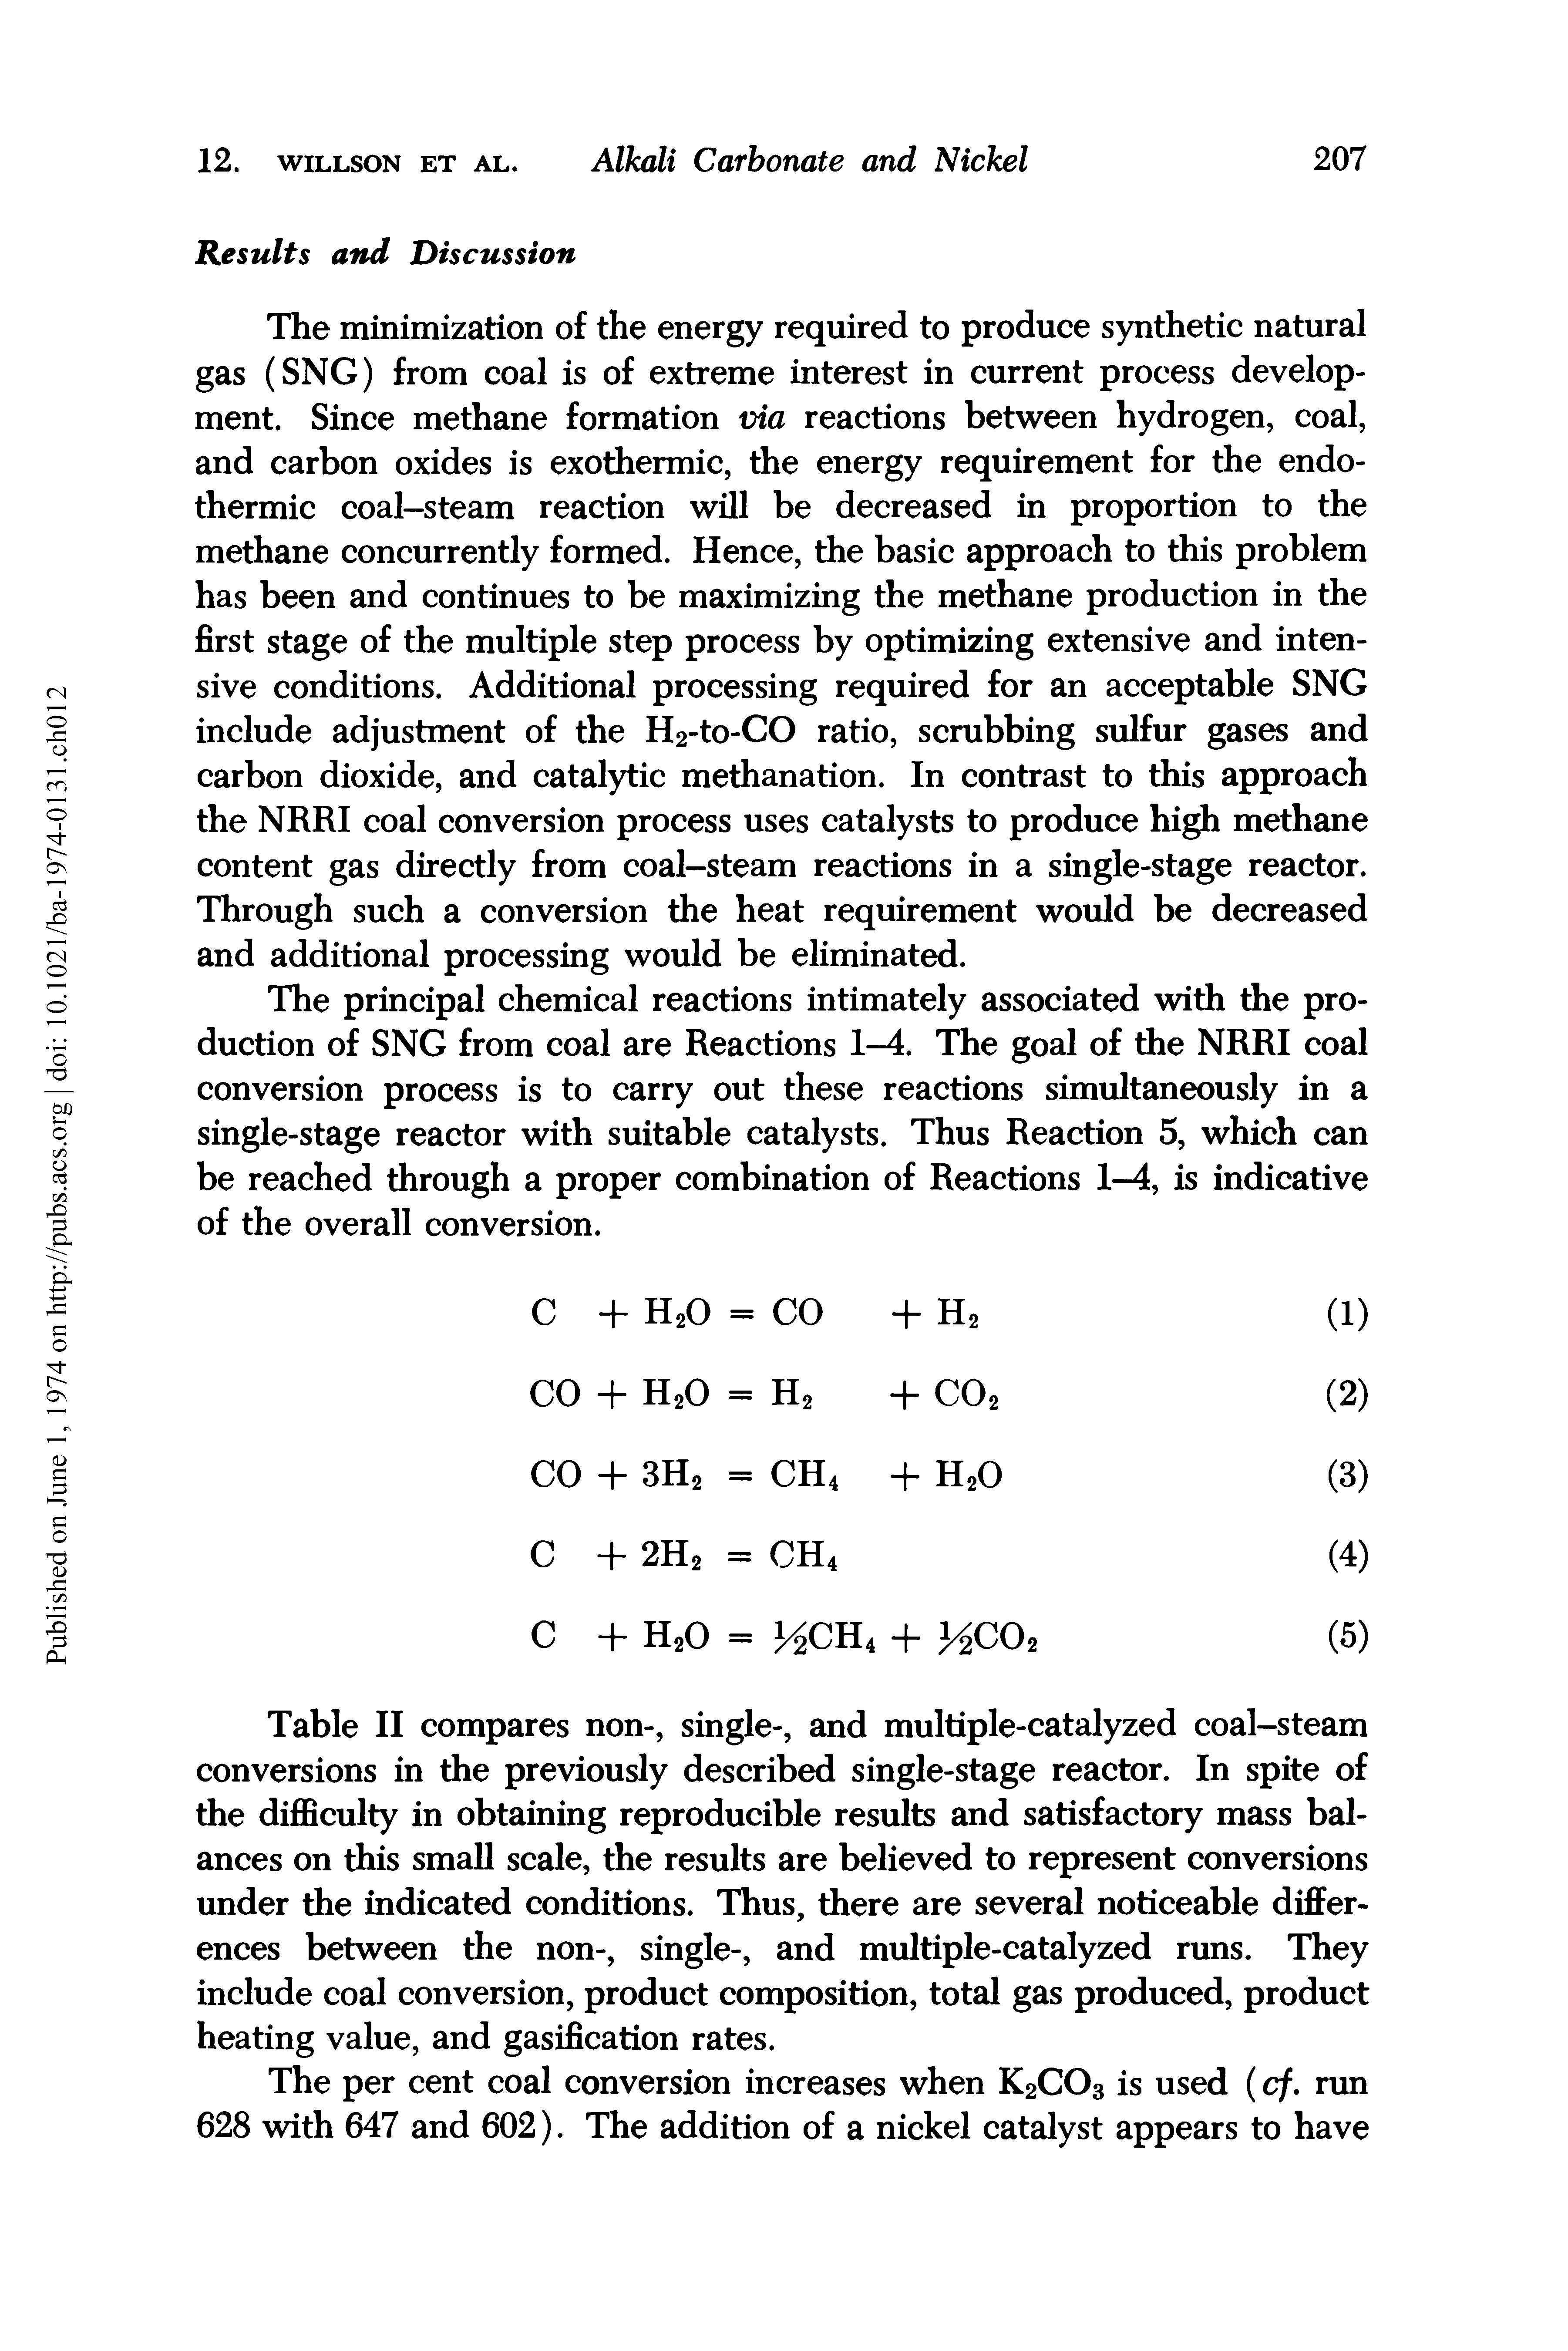 Table II compares non-, single-, and multiple-catalyzed coal-steam conversions in the previously described single-stage reactor. In spite of the difficulty in obtaining reproducible results and satisfactory mass balances on this small scale, the results are believed to represent conversions under the indicated conditions. Thus, there are several noticeable differences between the non-, single-, and multiple-catalyzed runs. They include coal conversion, product composition, total gas produced, product heating value, and gasification rates.